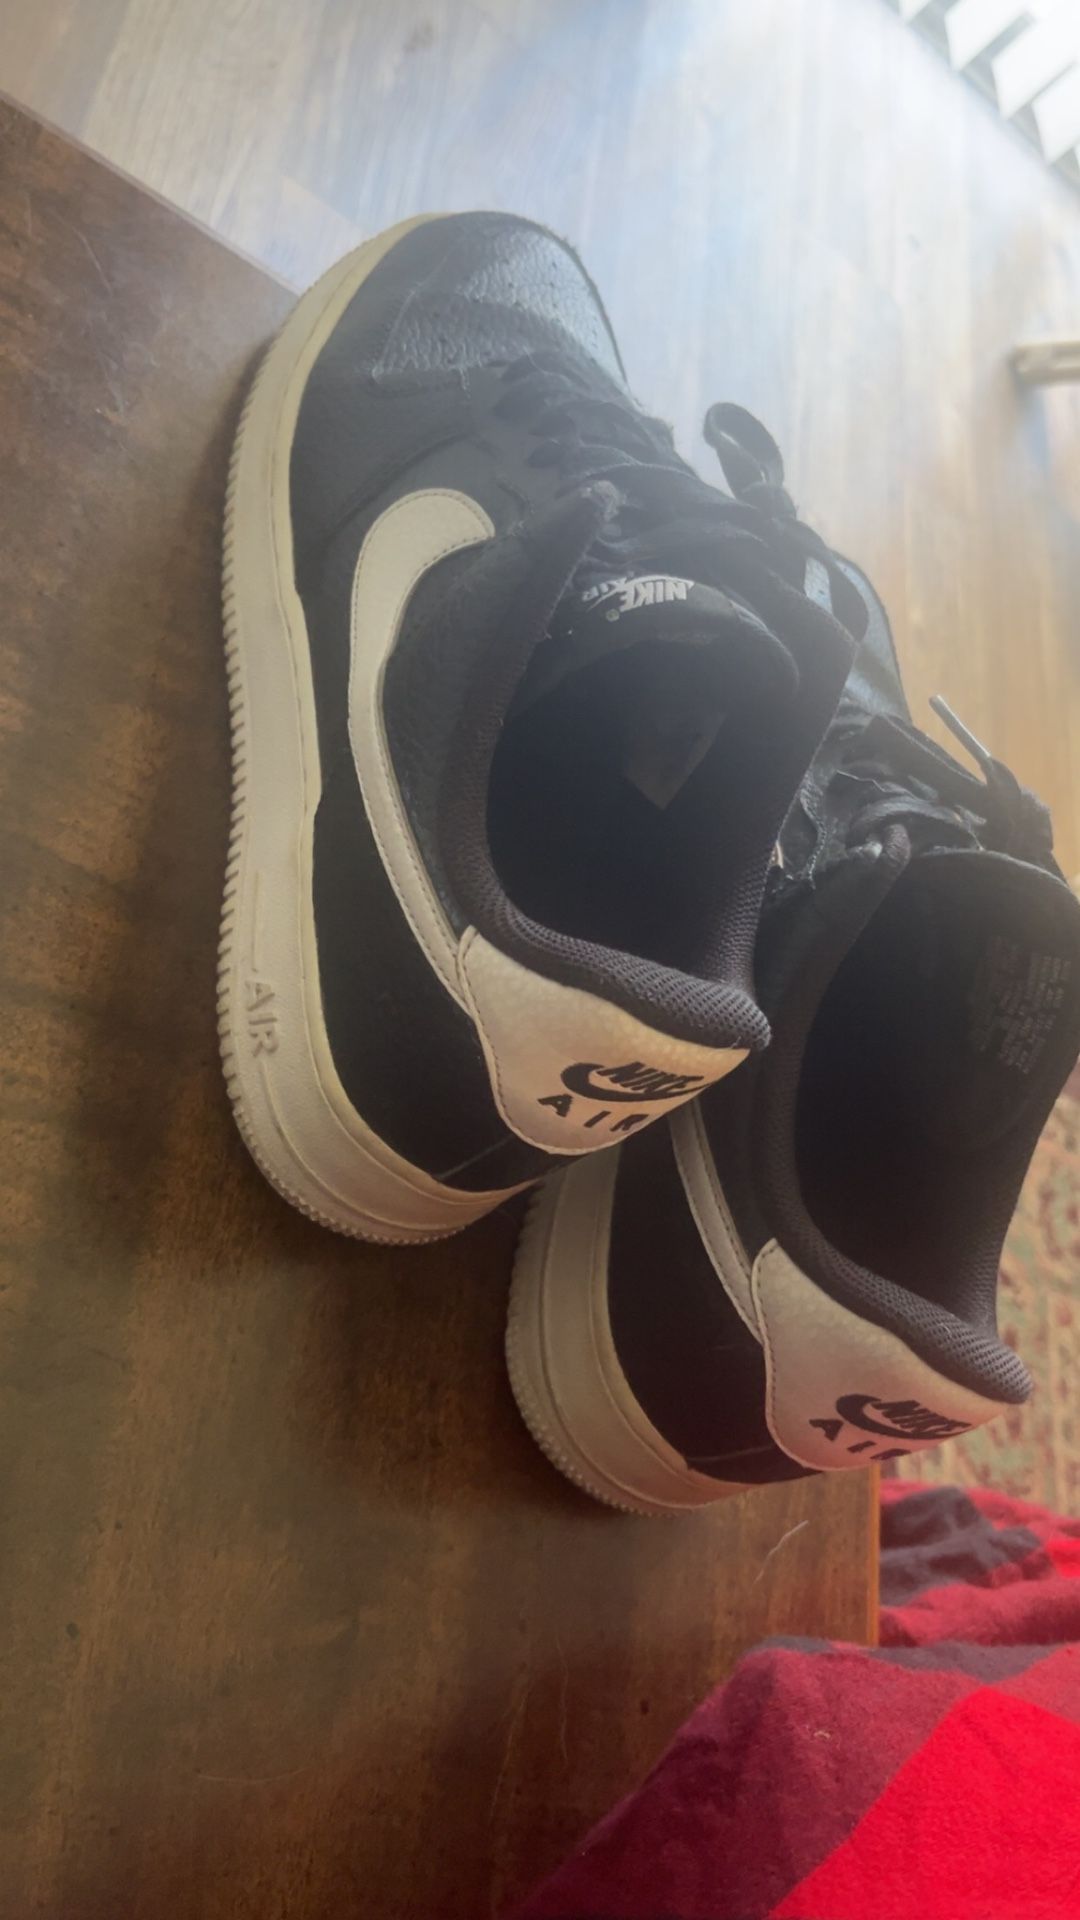 nike air force 1 black and white, size 9.